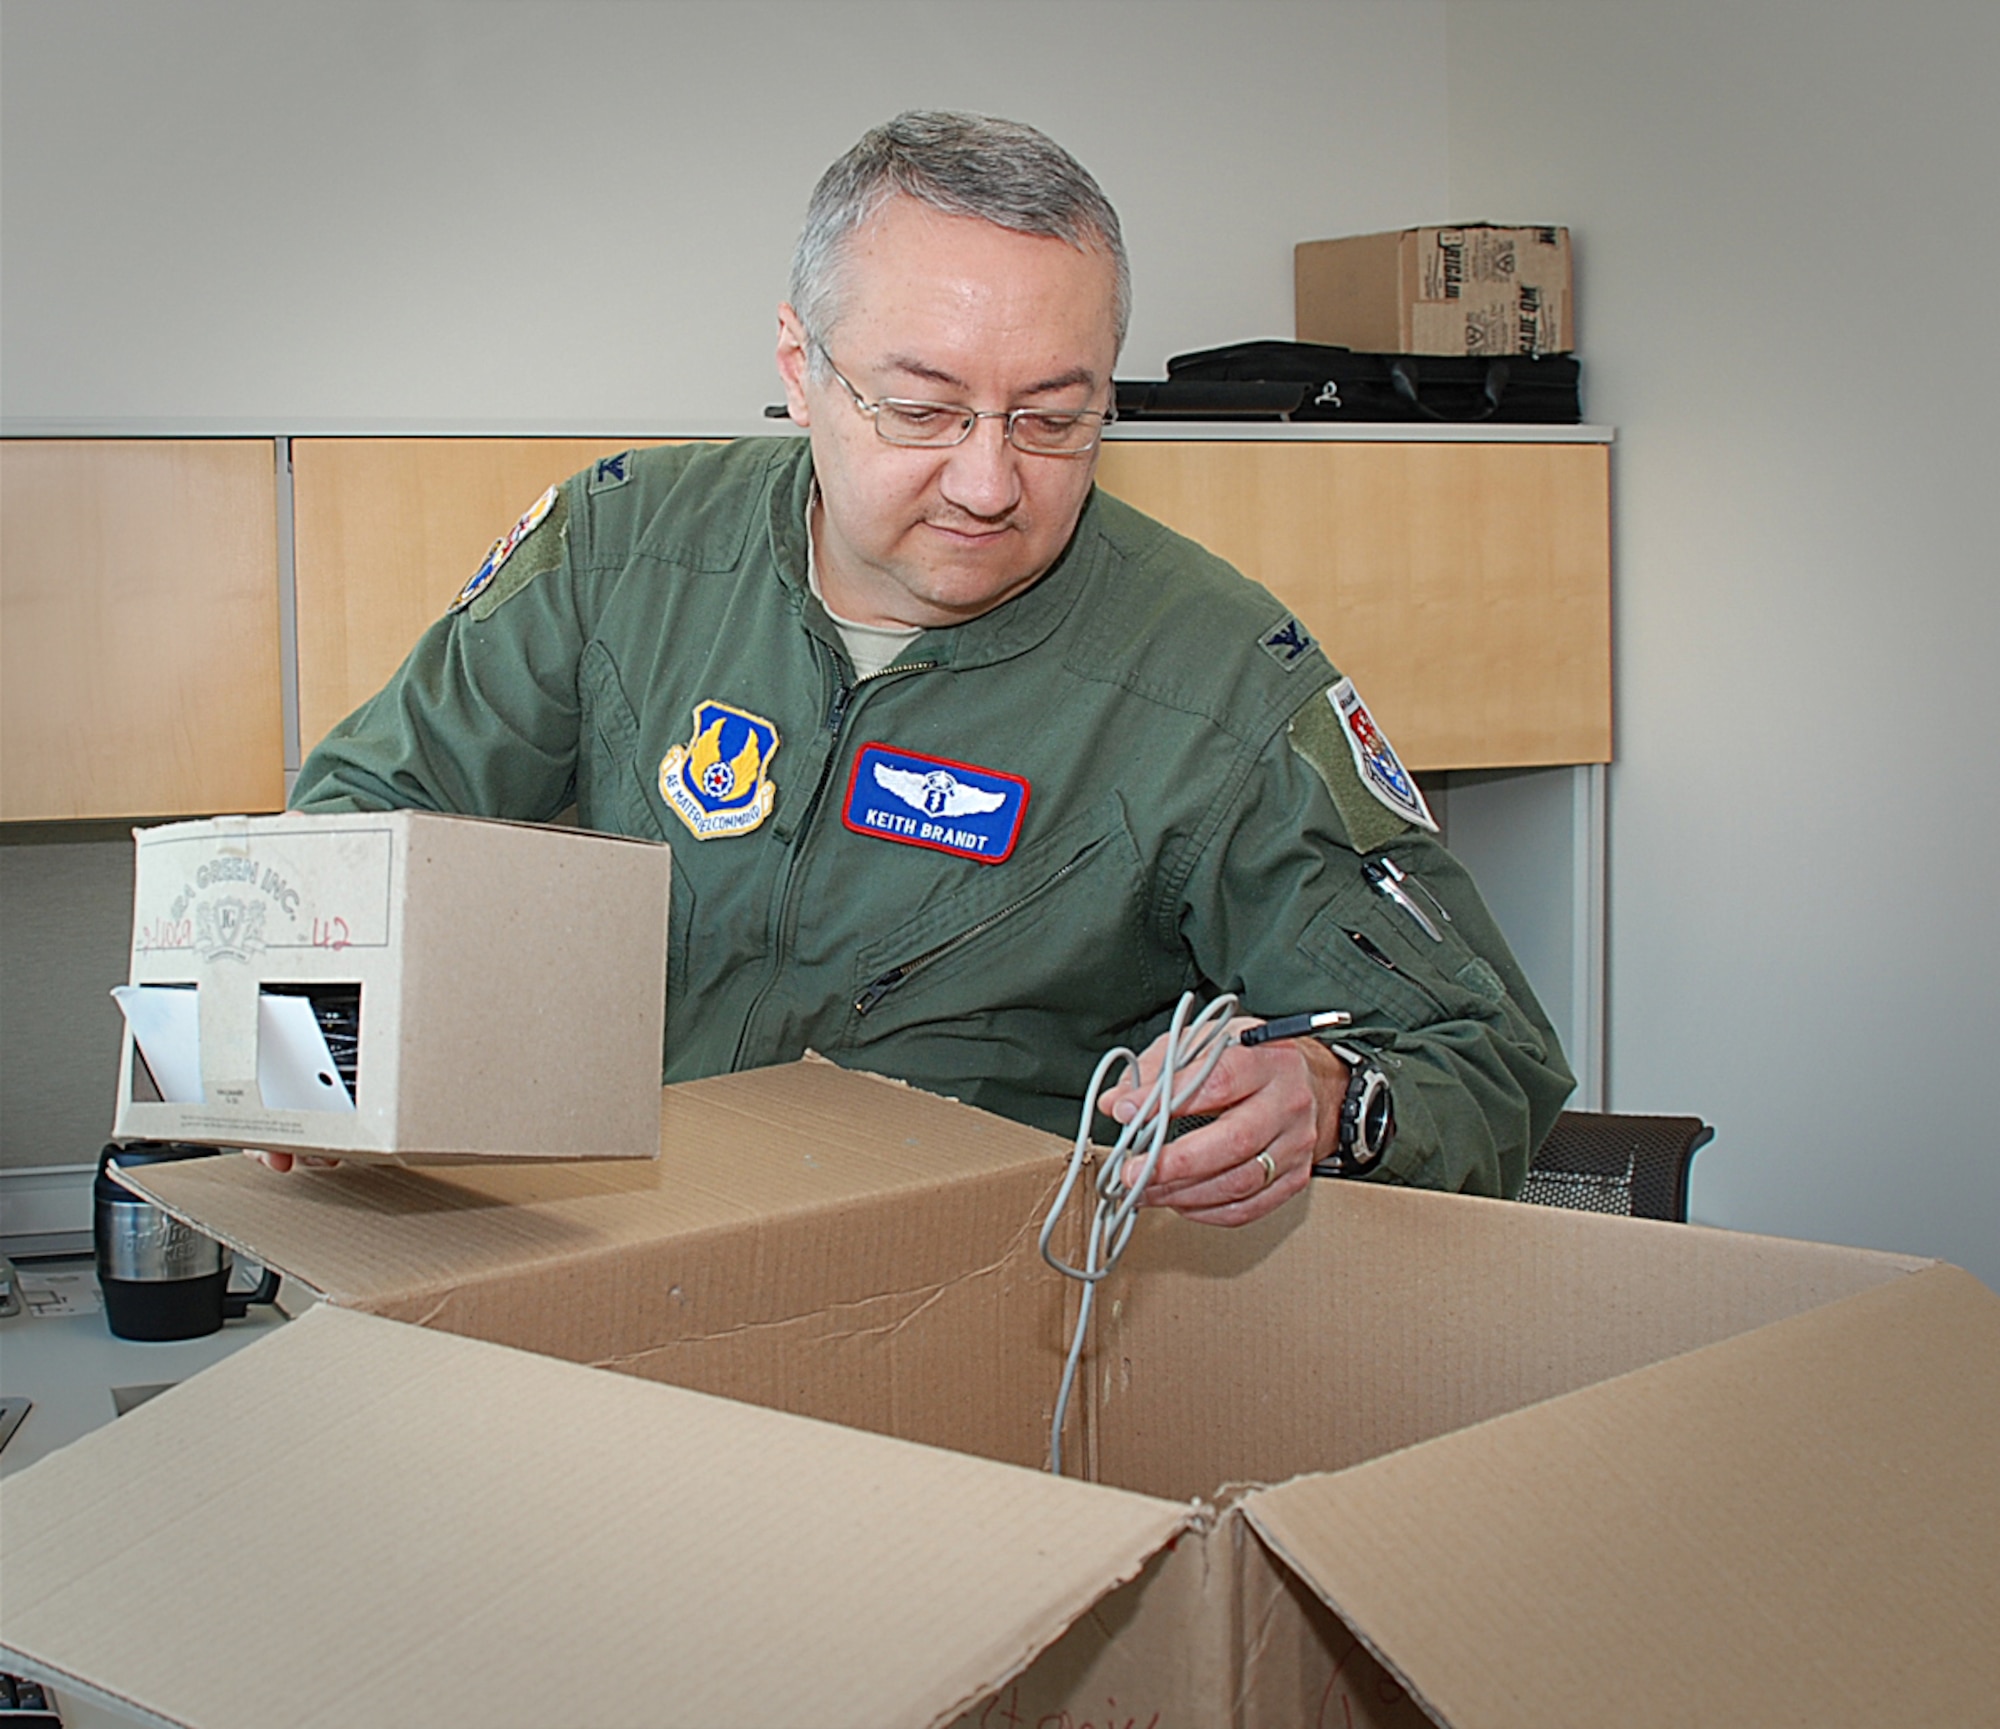 Colonel Keith Brandt, chief of the United States Air Force School of Aerospace Medicine’s (USAFSAM’s) Aerospace Medicine Education Branch, settles into his office in the new Major General Harry G. Armstrong complex at Wright-Patterson Air Force Base (WPAFB) in Ohio. USAFSAM is relocating its missions to WPAFB from Brooks City-Base in Texas. (Photo by Chris Gulliford, 711 HPW)